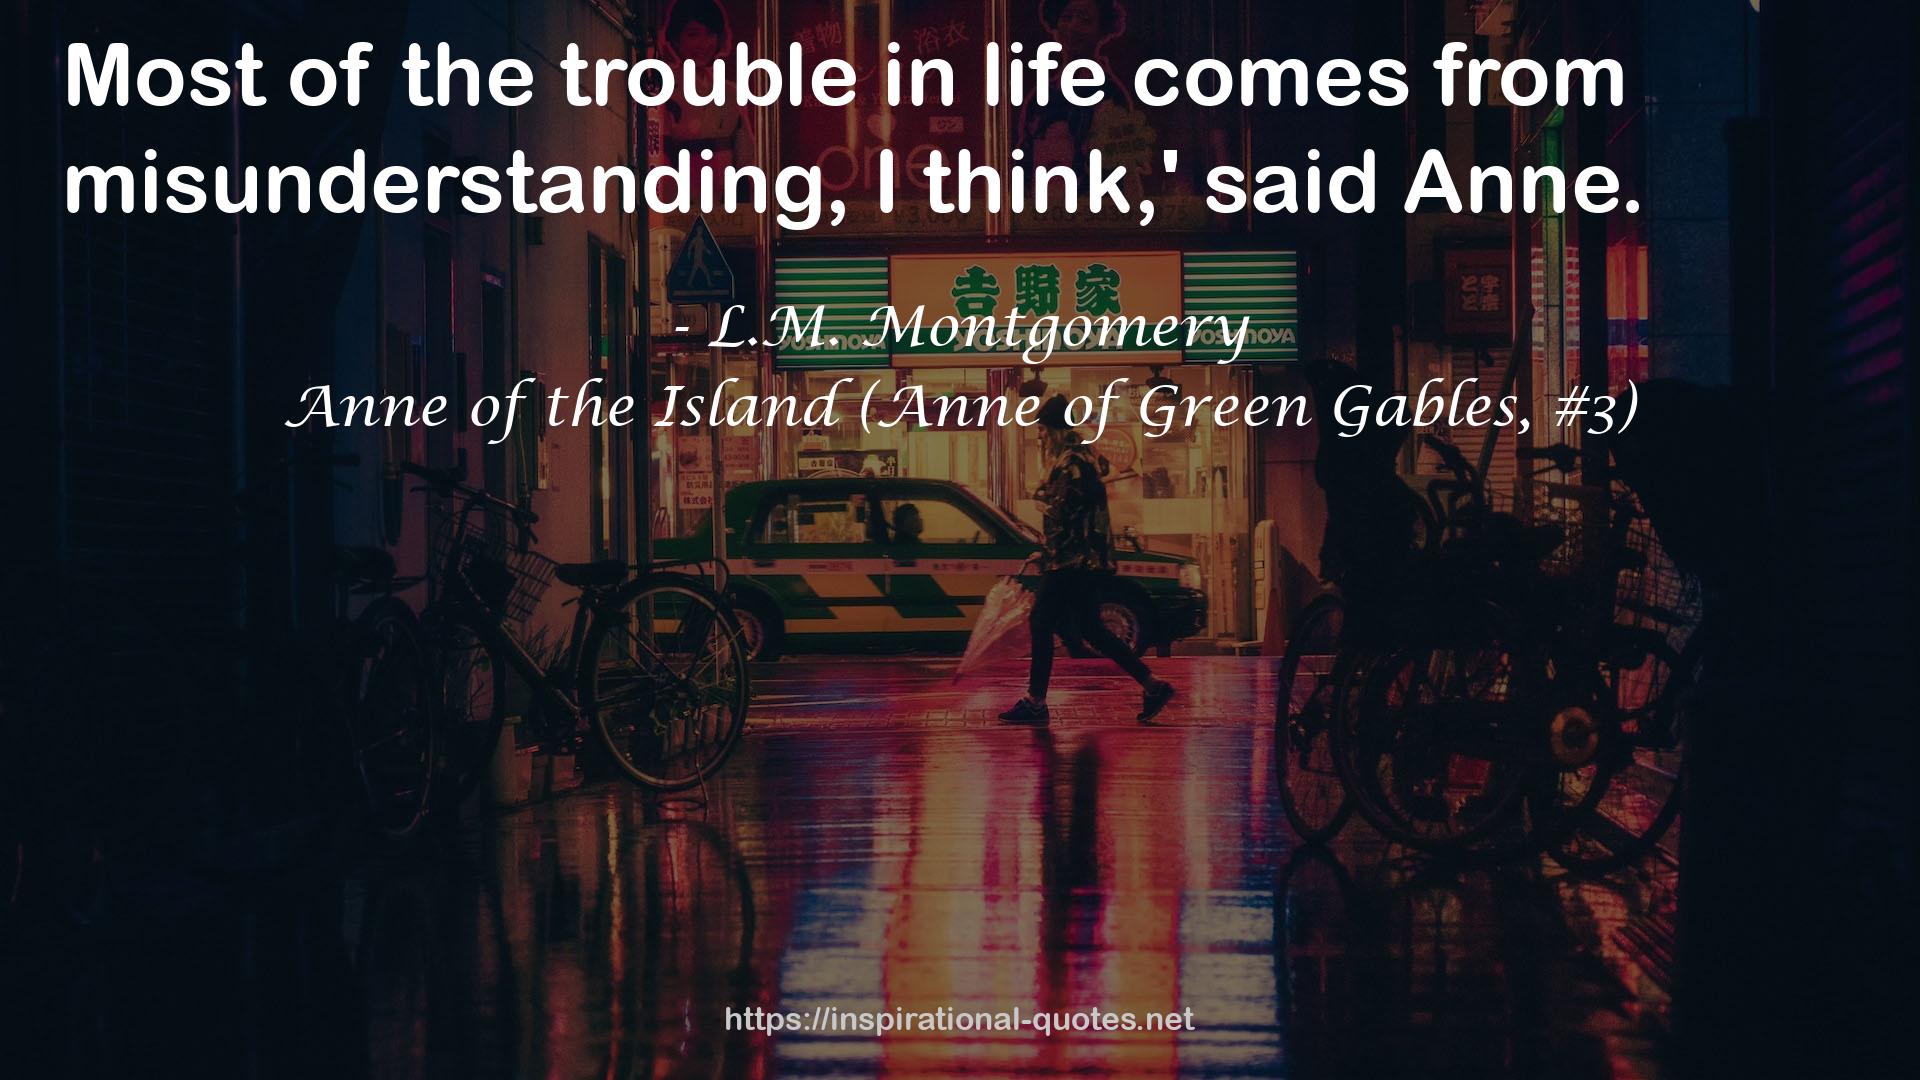 Anne of the Island (Anne of Green Gables, #3) QUOTES